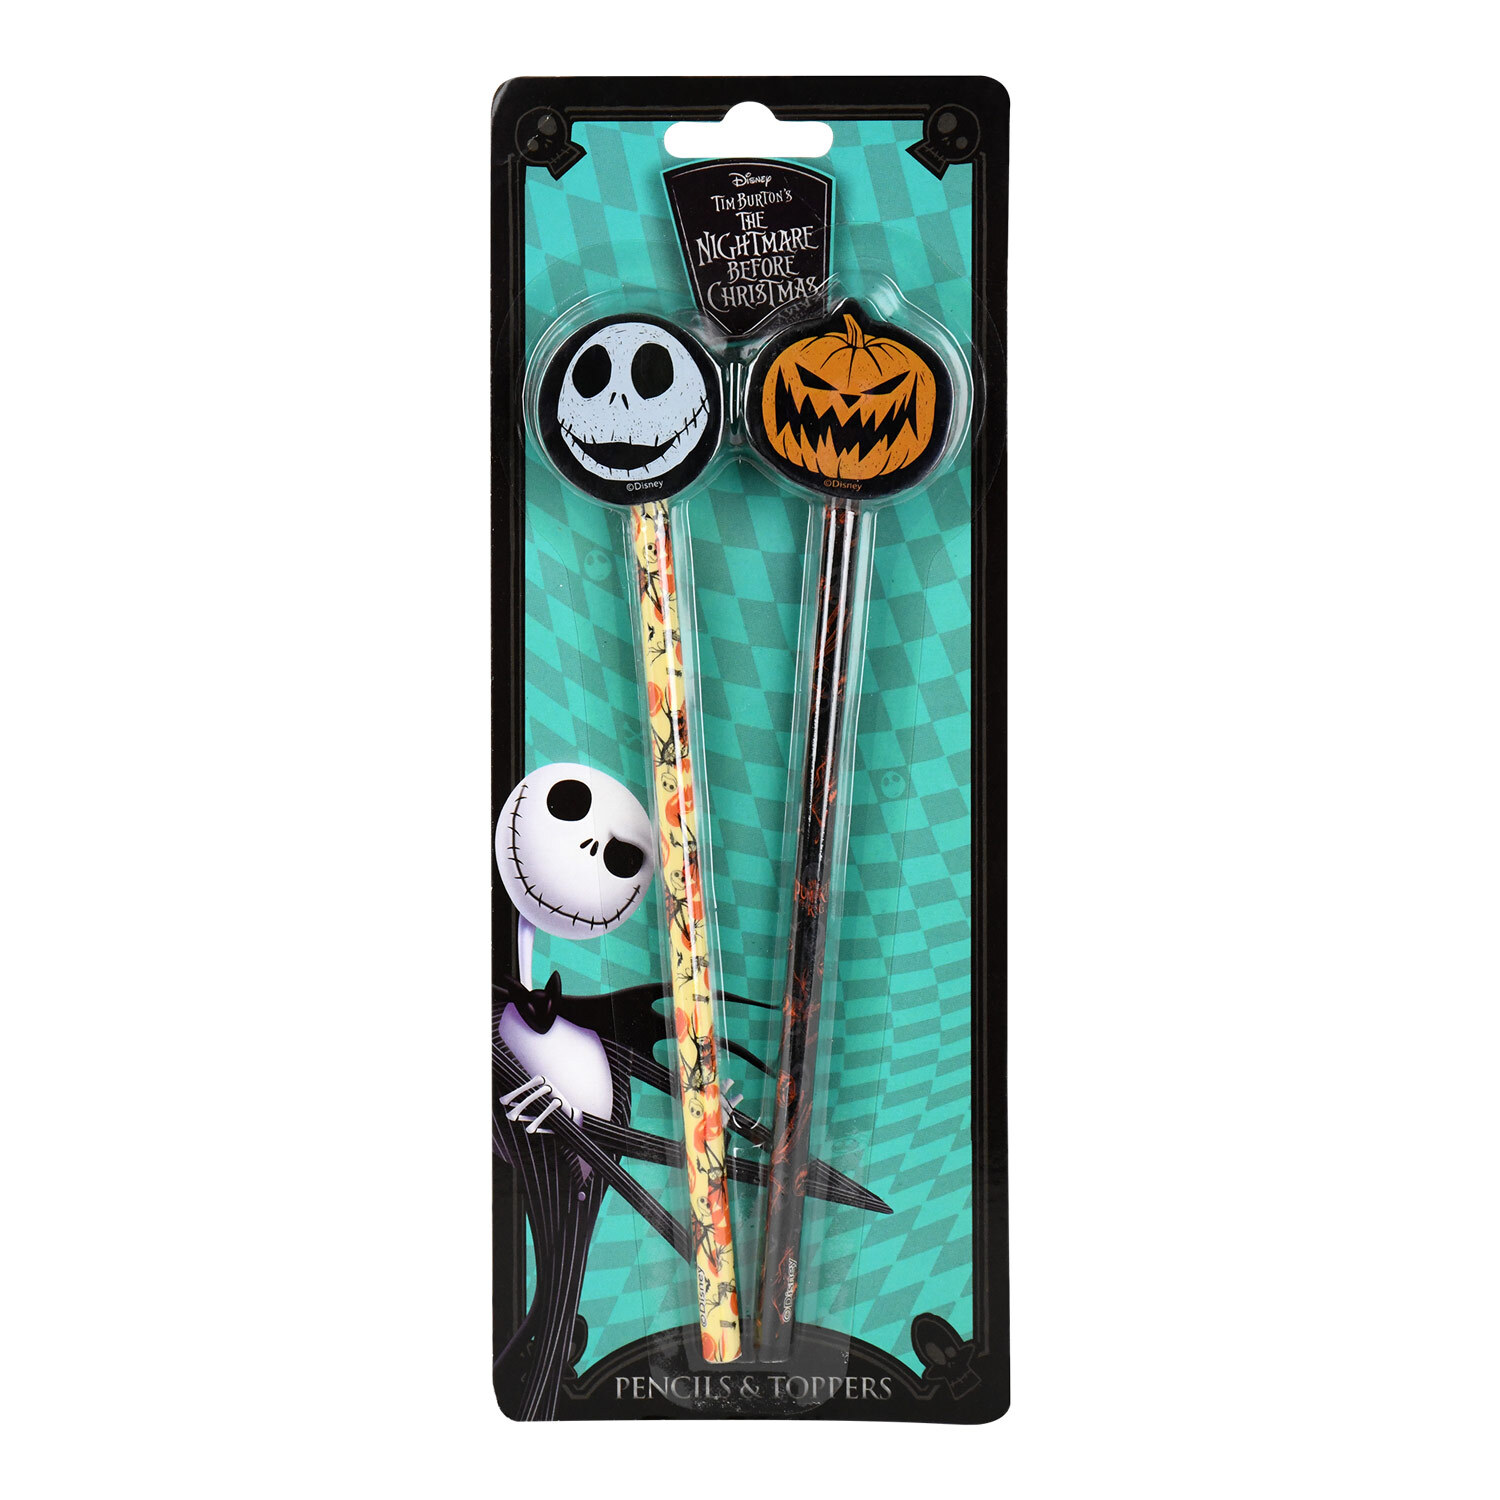 Pack of 2 Nightmare Before Christmas Pencils Image 1